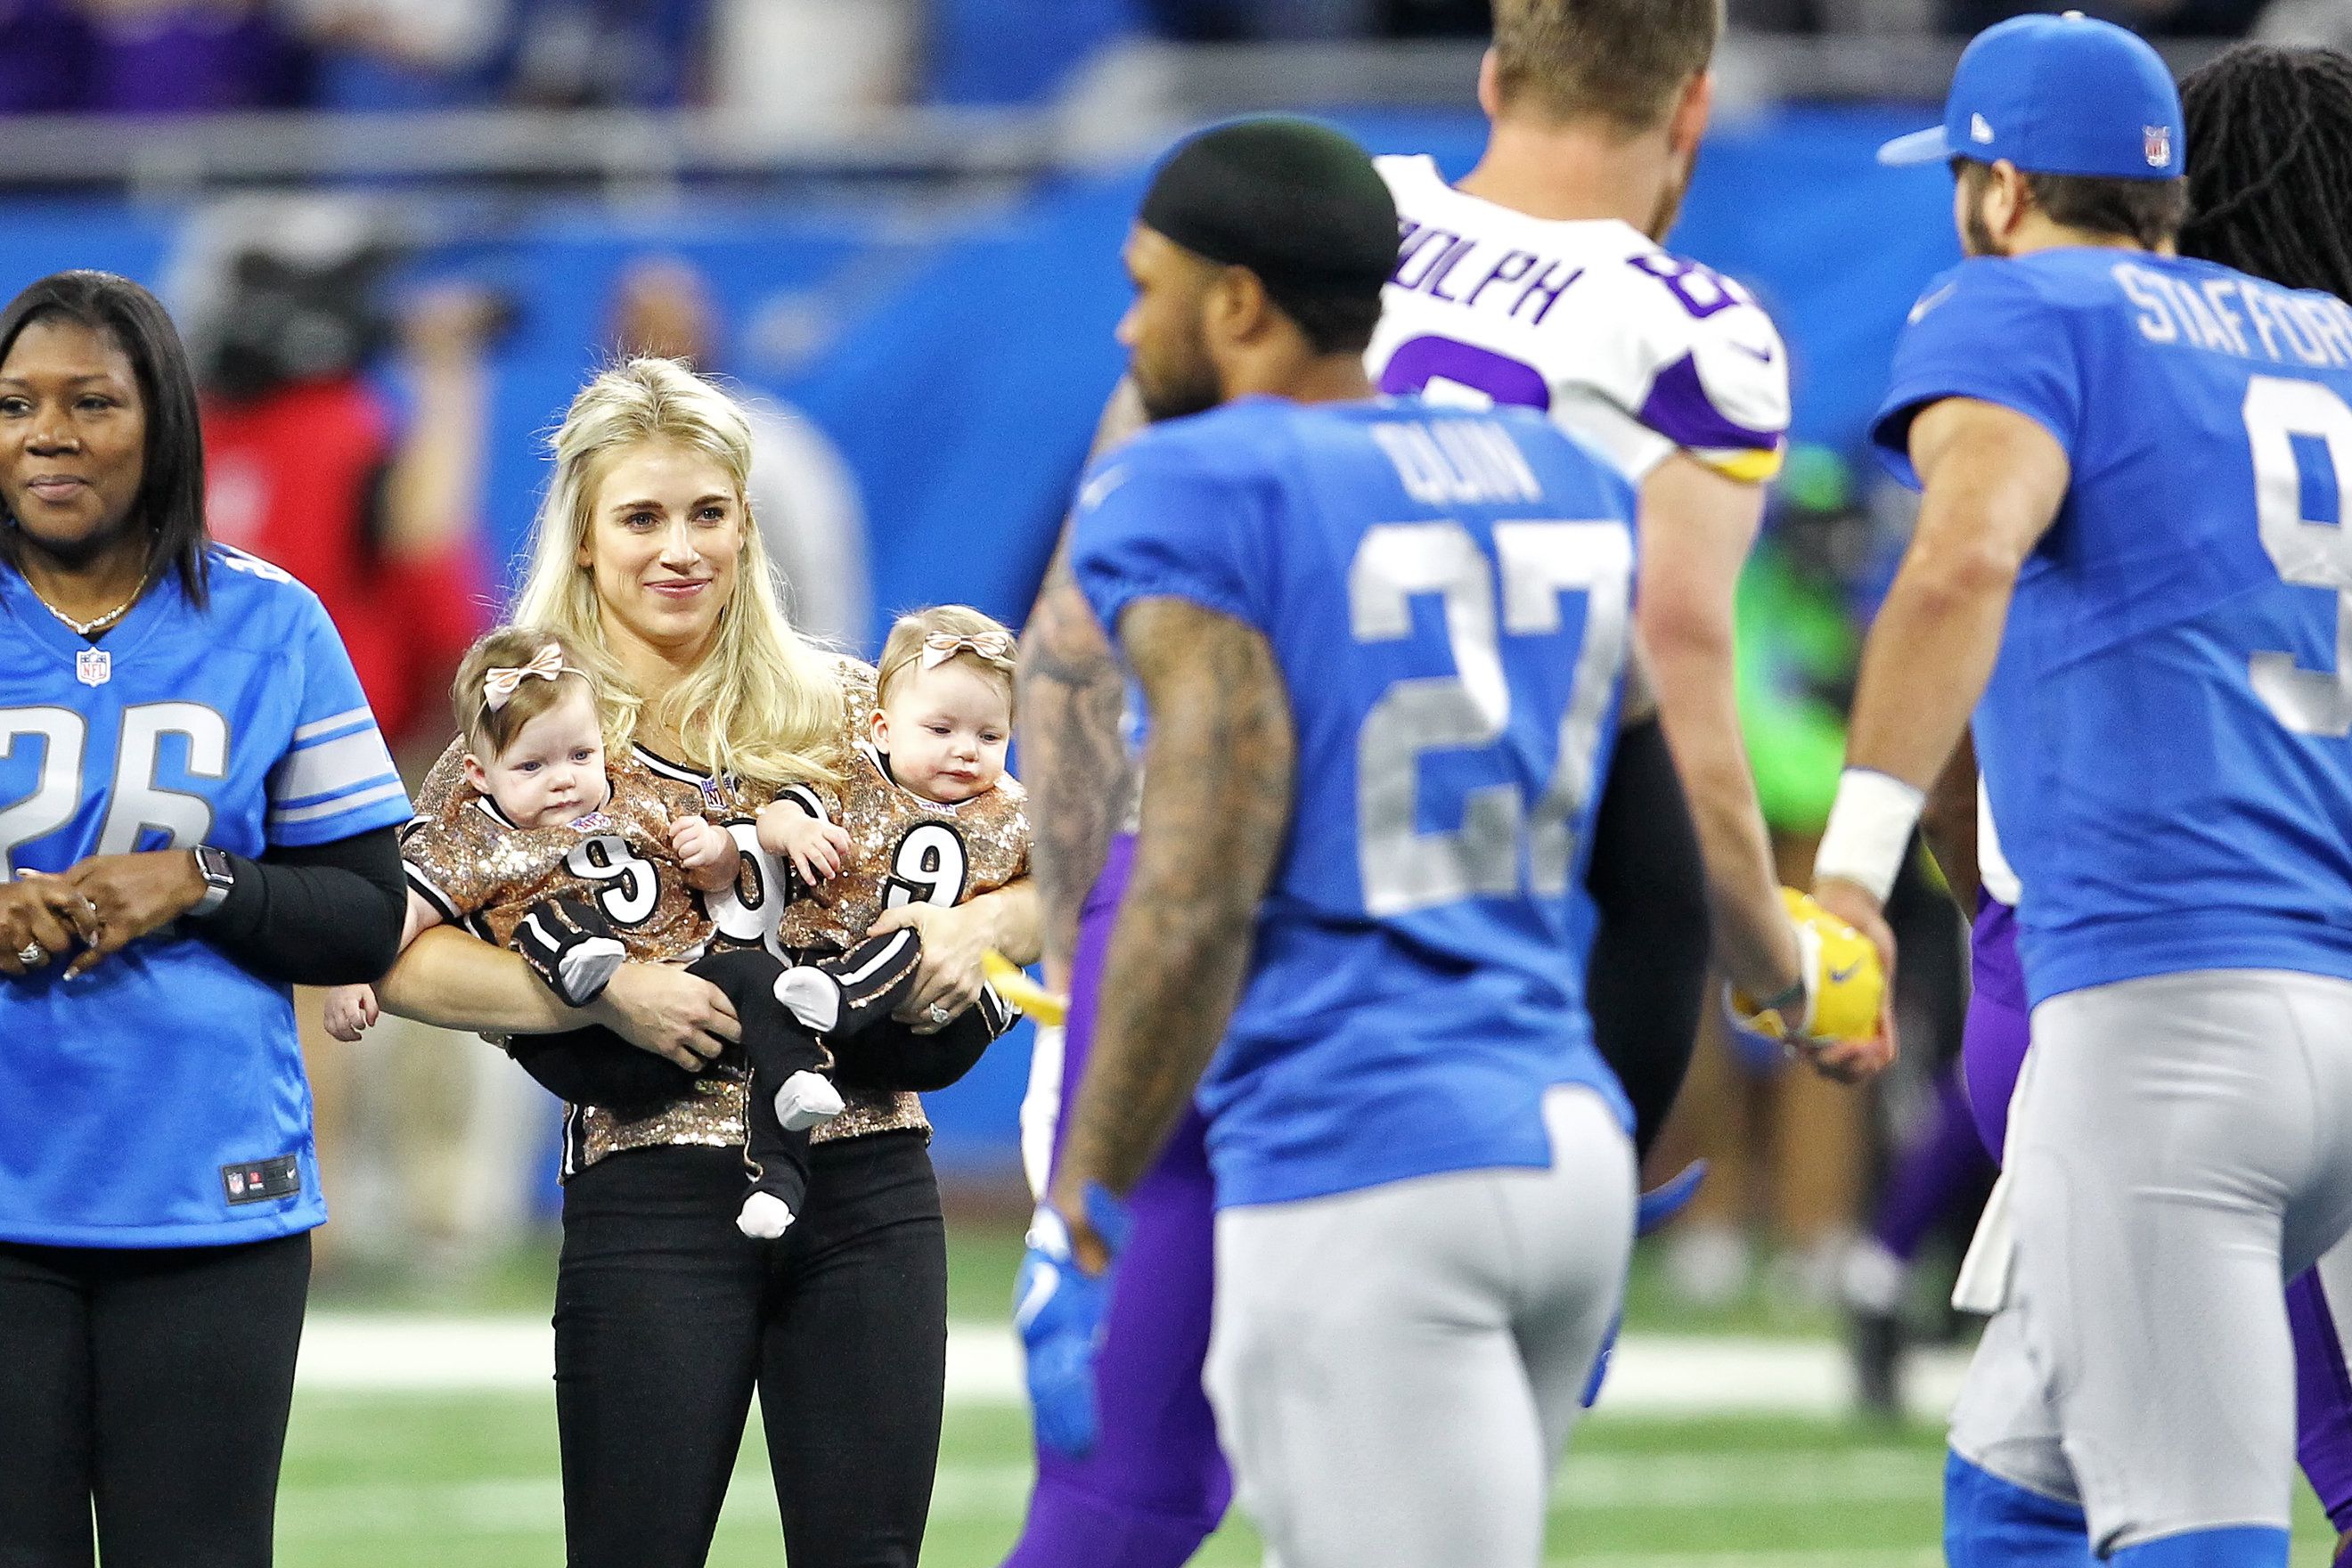 Kelly Stafford, wife of Matthew: 'We are going to enjoy our time